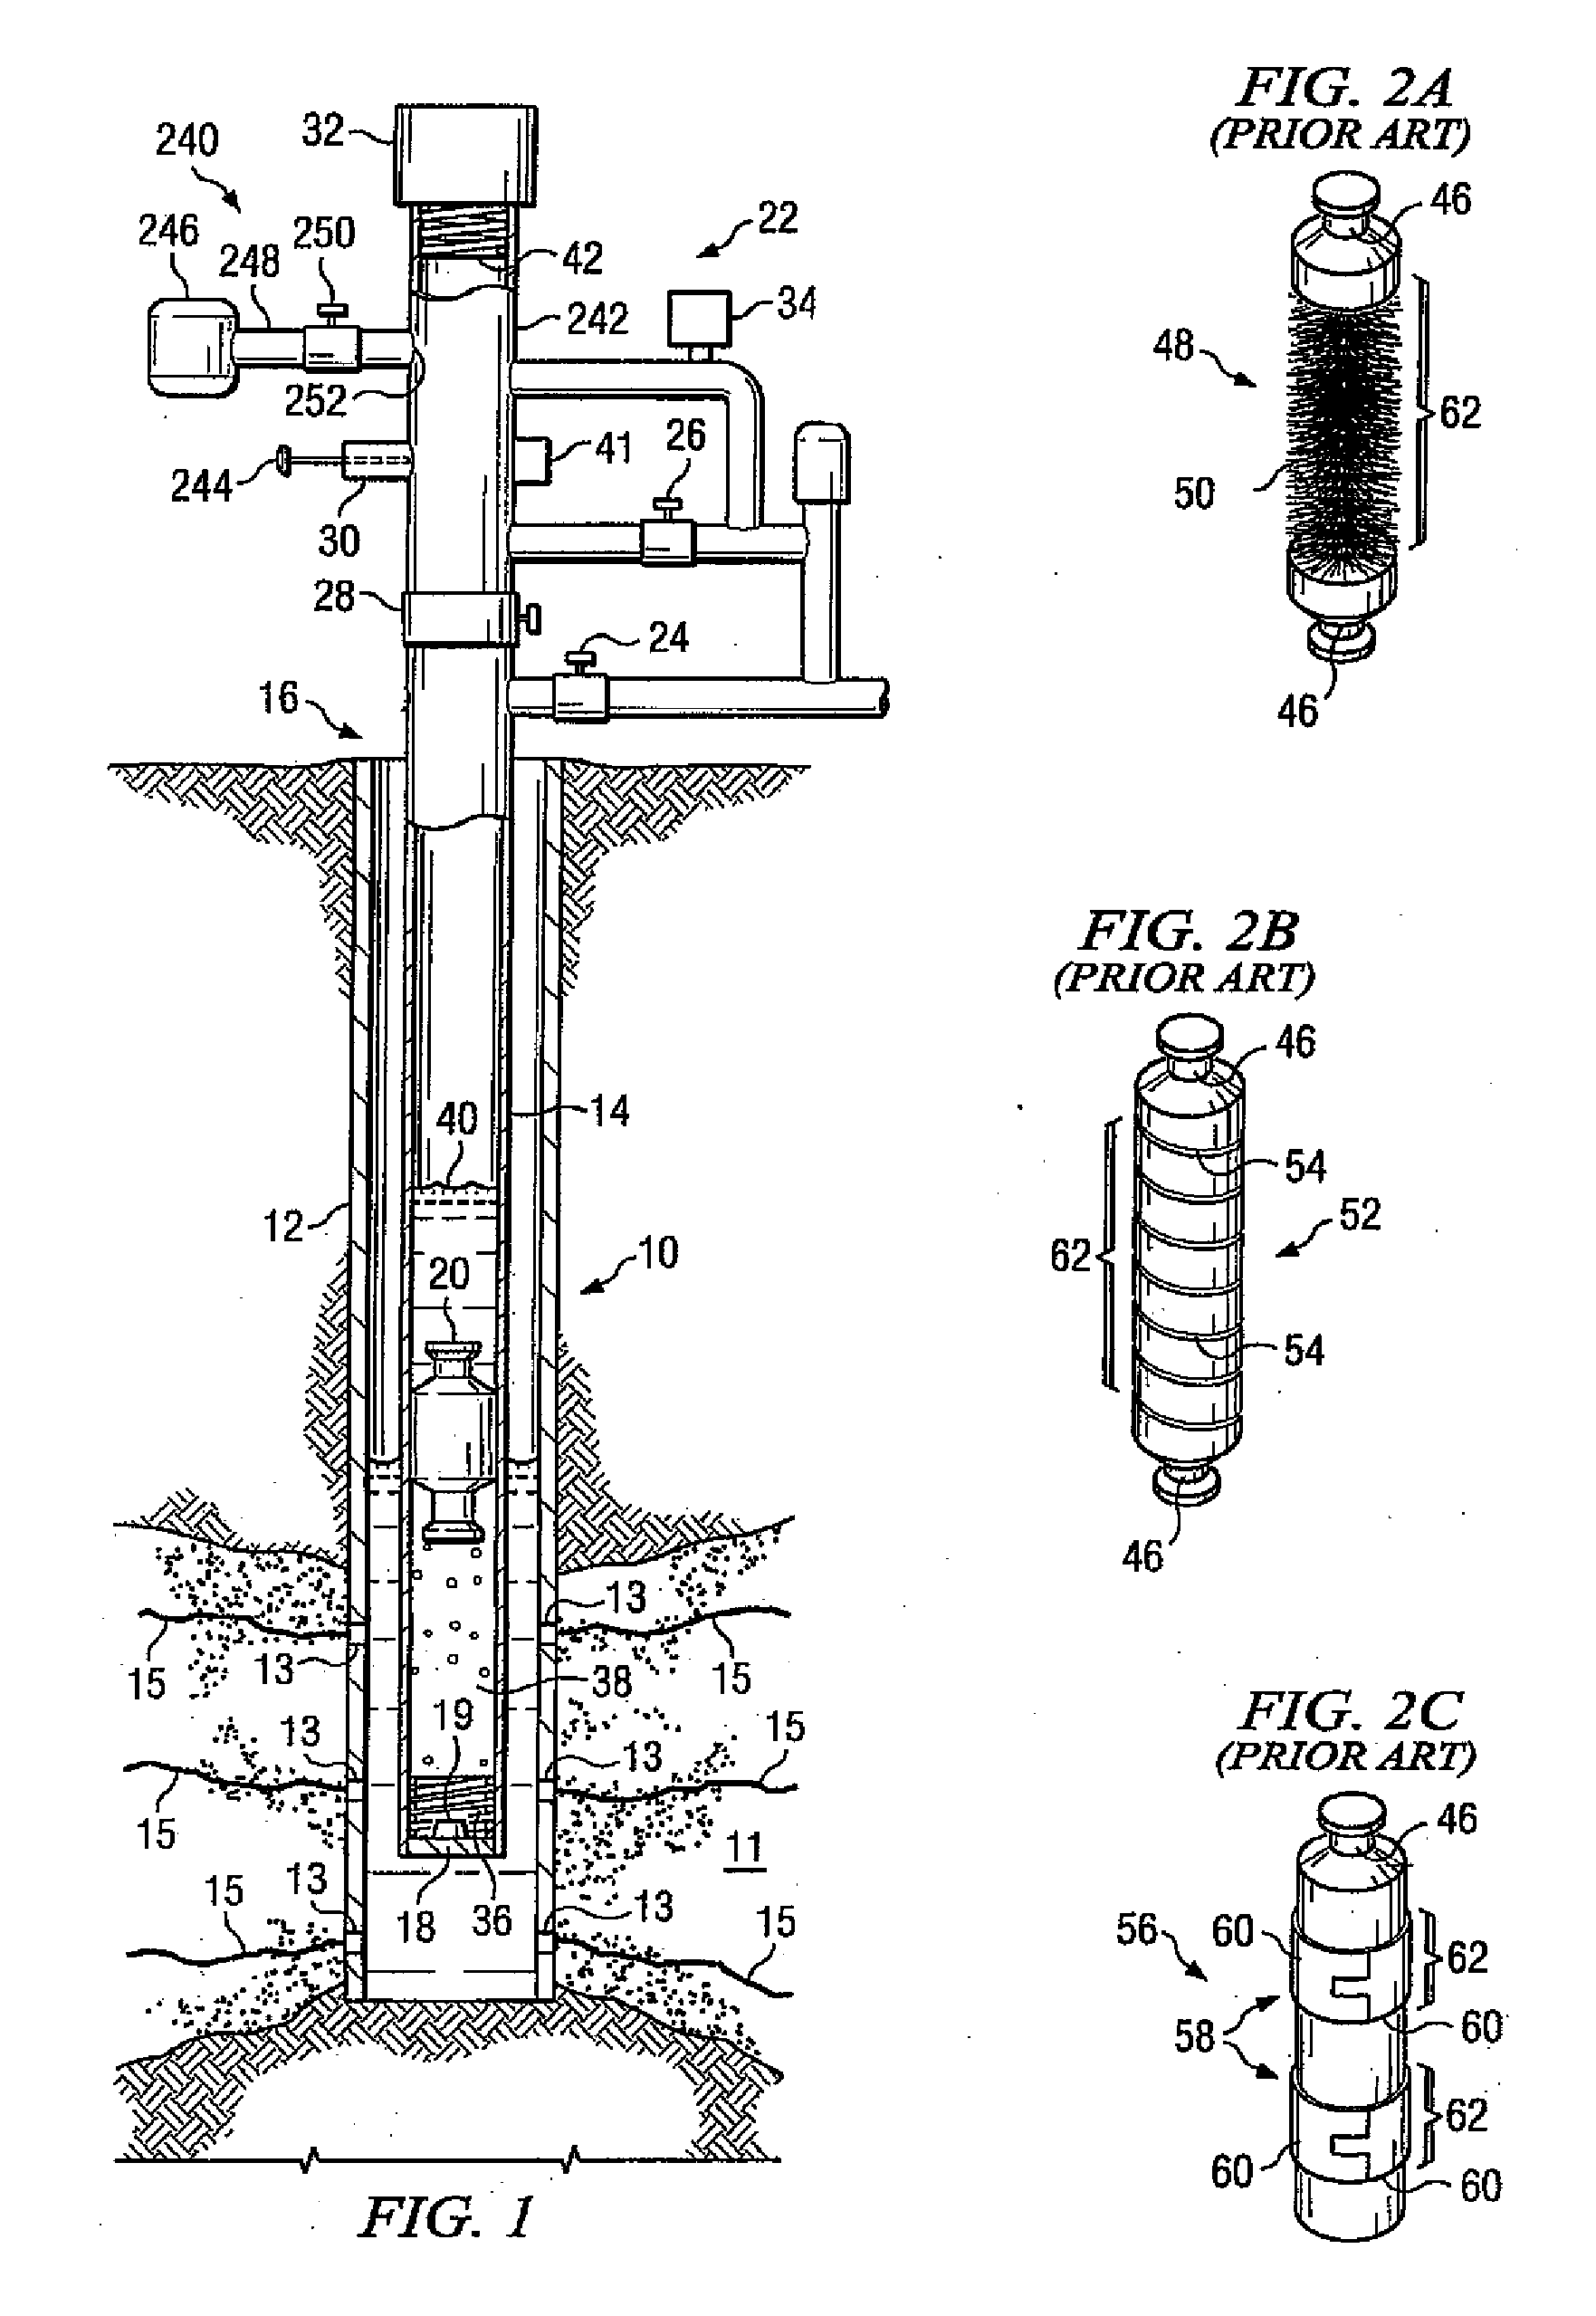 Well chemical treatment utilizing plunger lift delivery system with chemically improved plunger seal